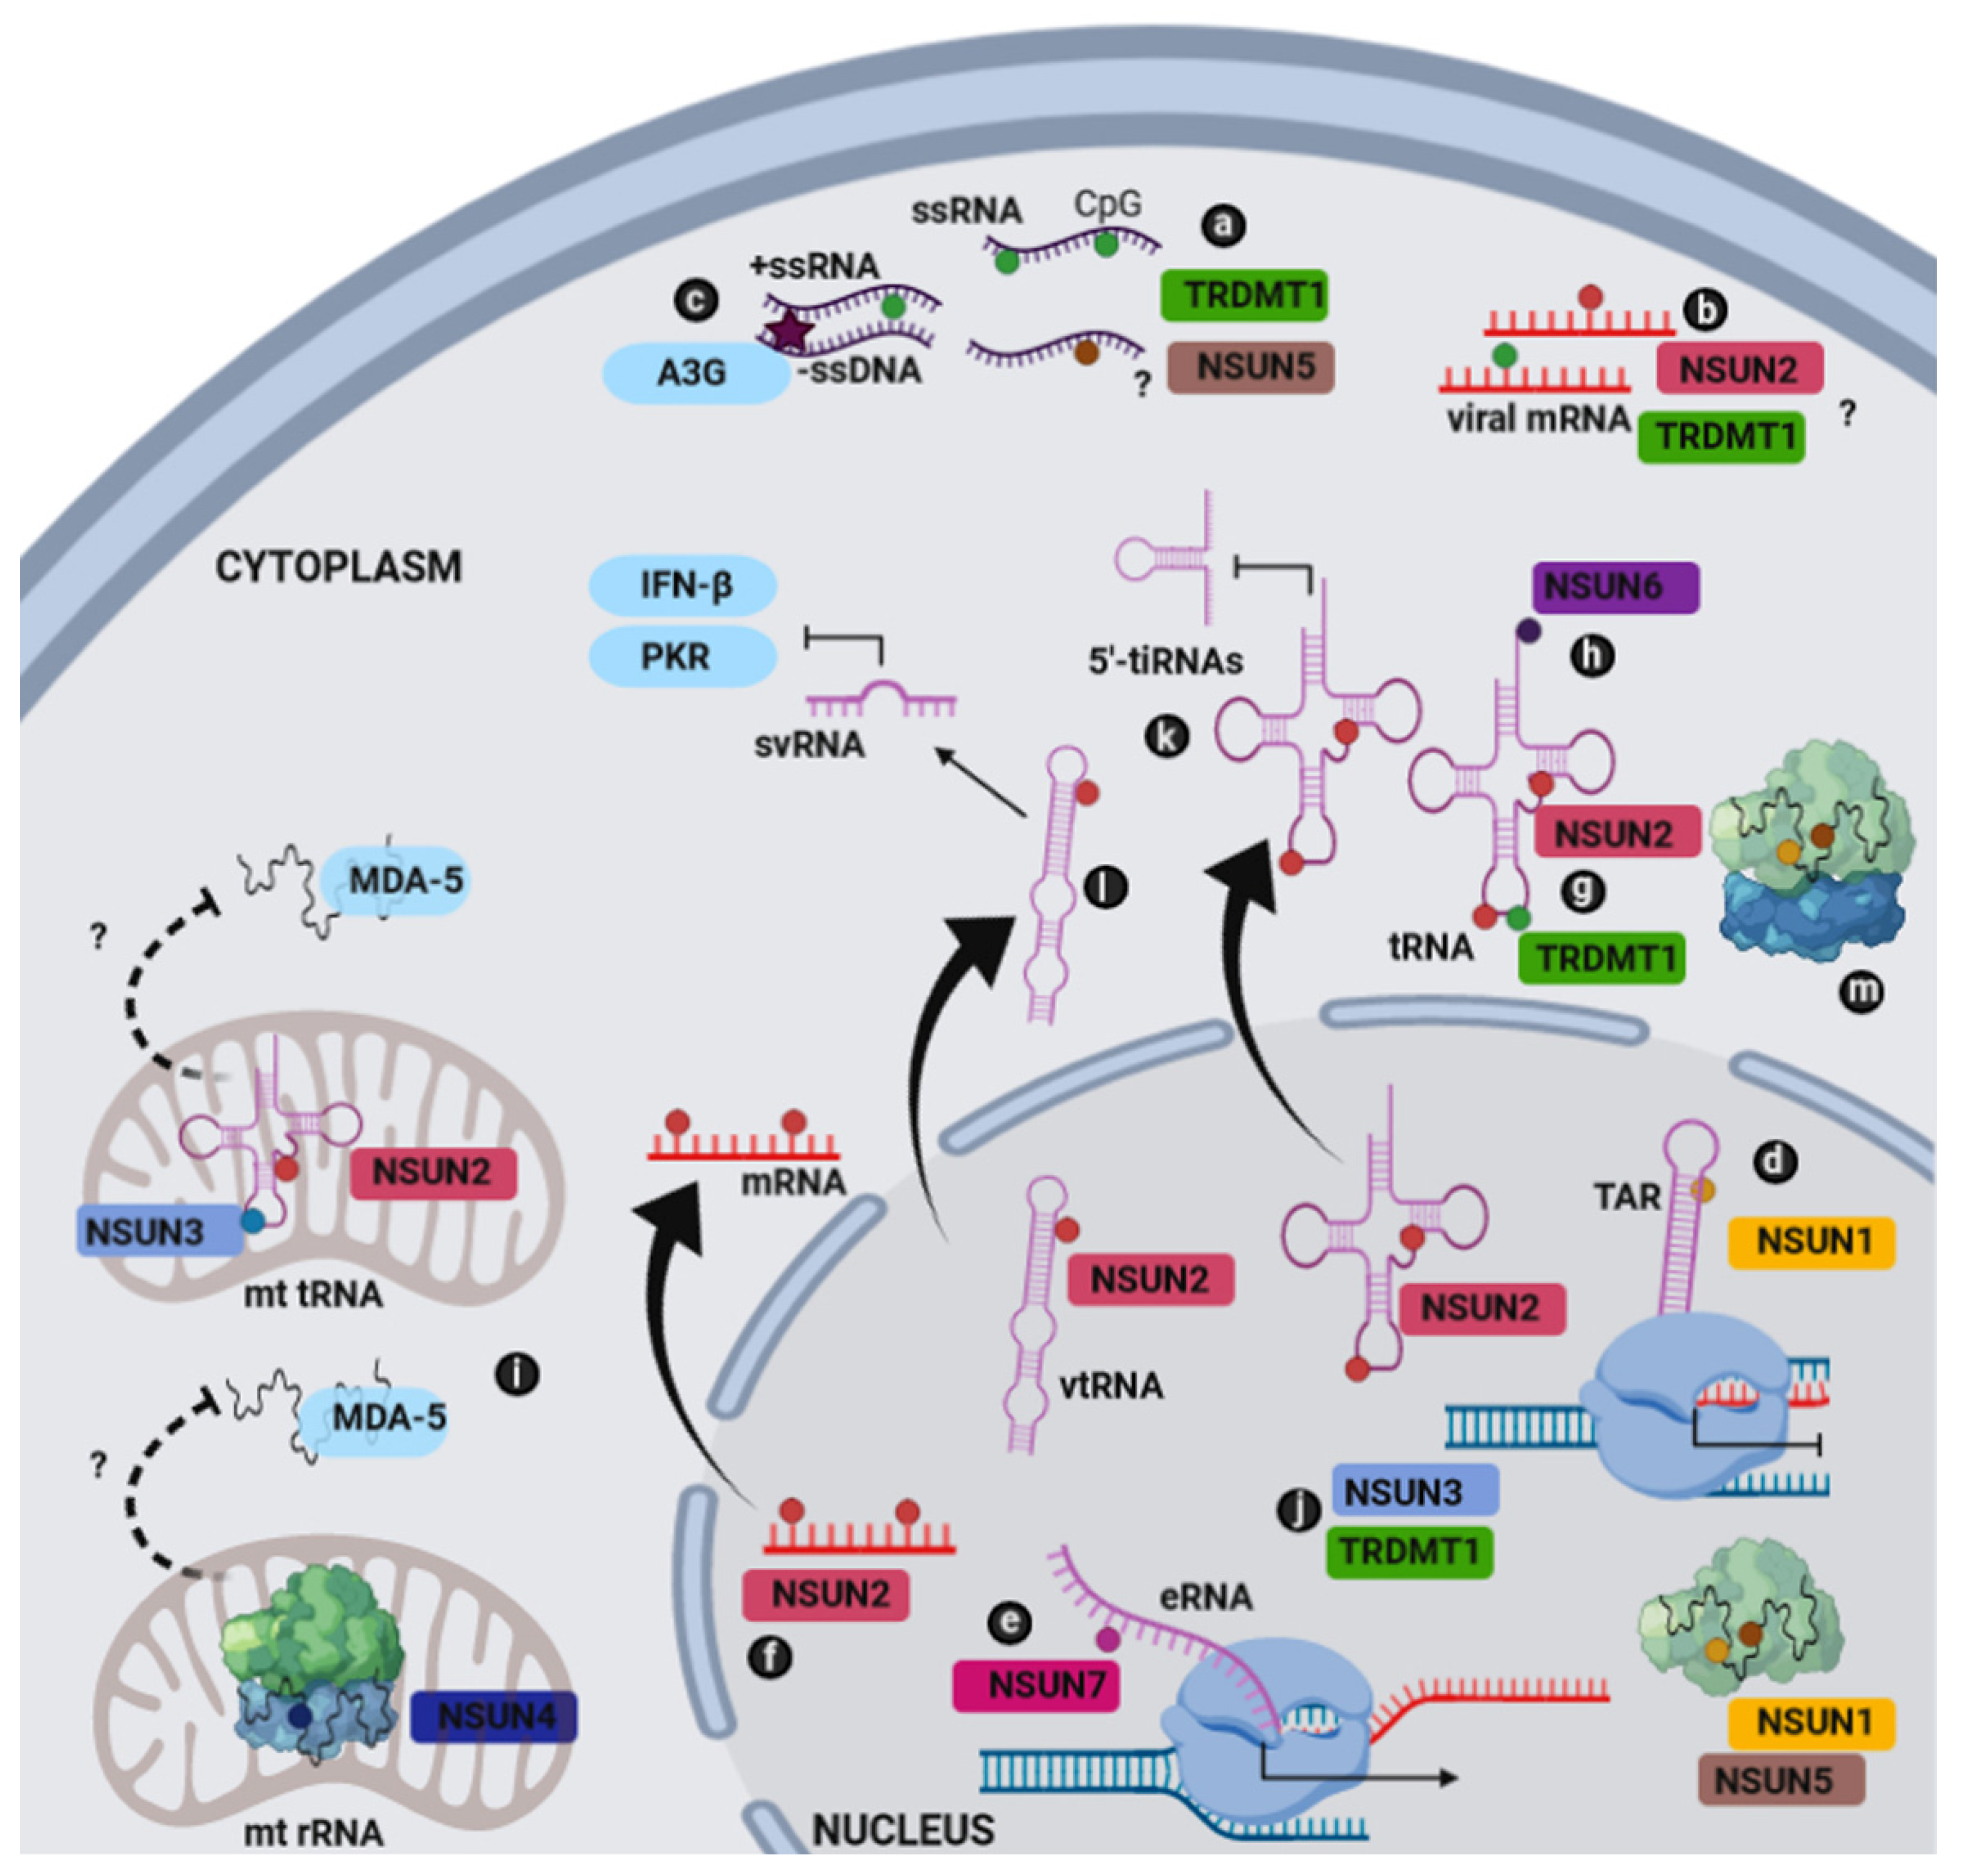 2′-O methylation of the viral mRNA cap evades host restriction by IFIT  family members